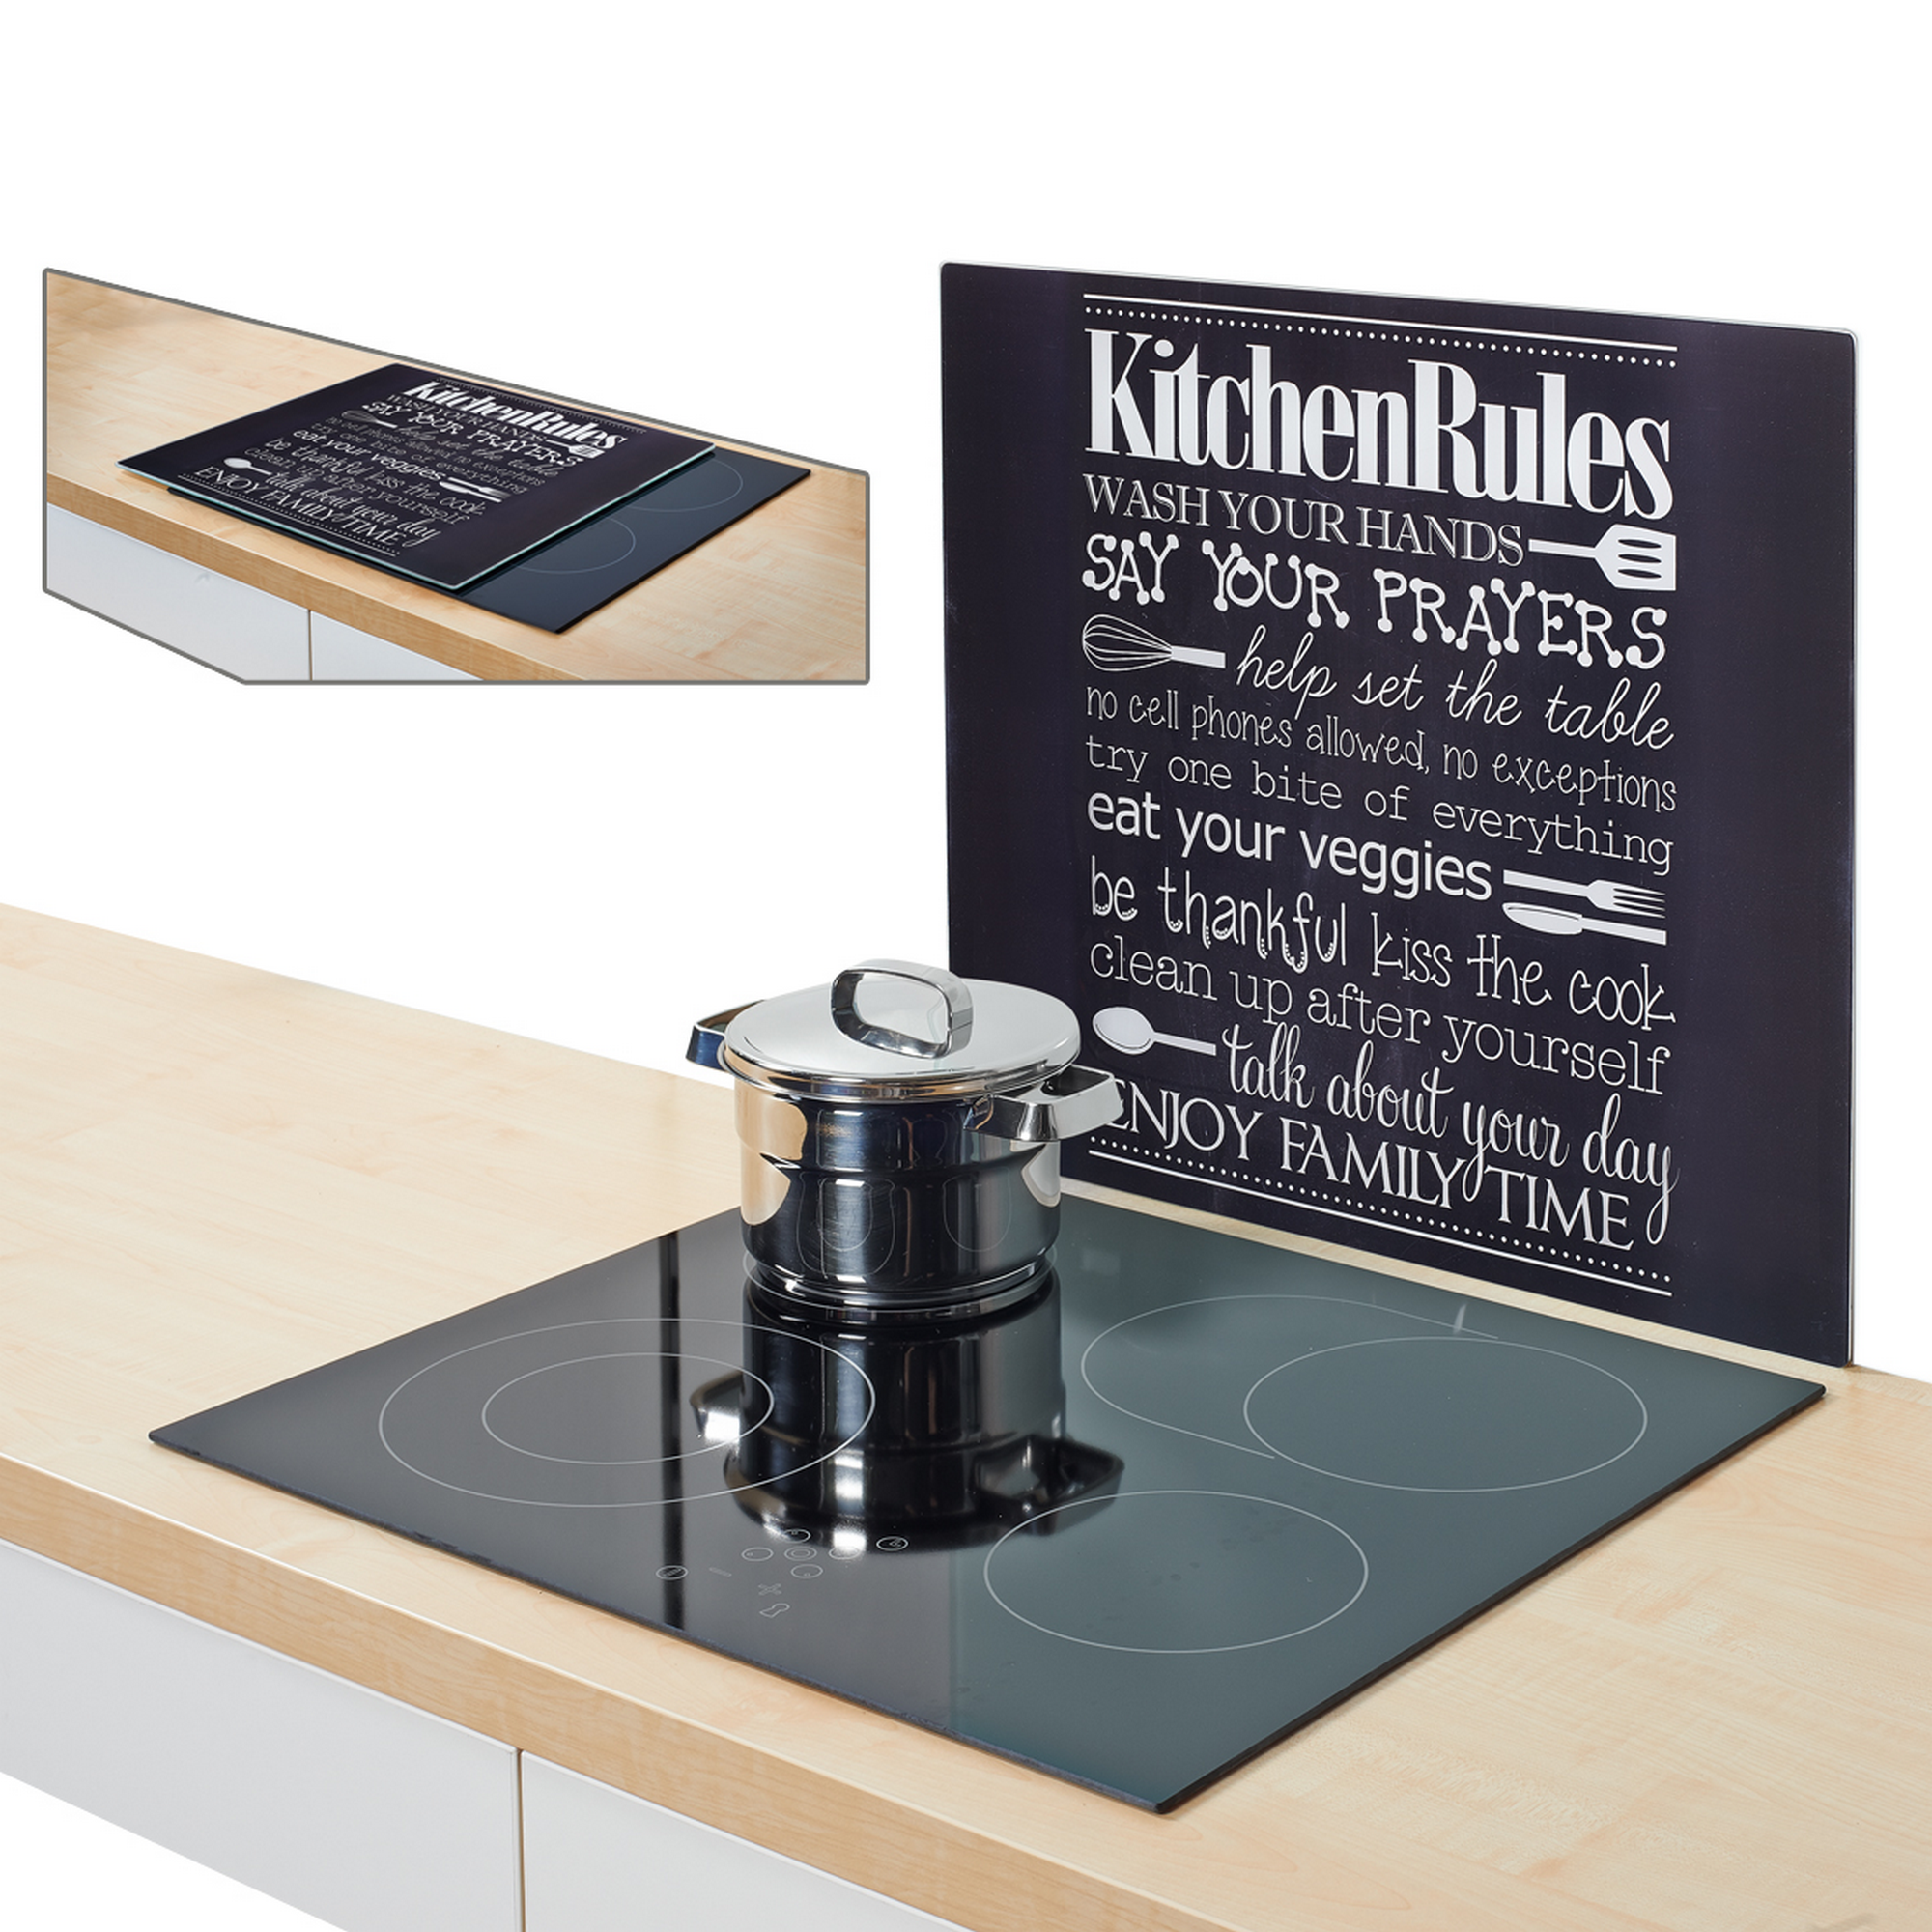 Herdblende 'Kitchen Rules' mehrfarbig 56 x 0,8 x 50 cm + product picture